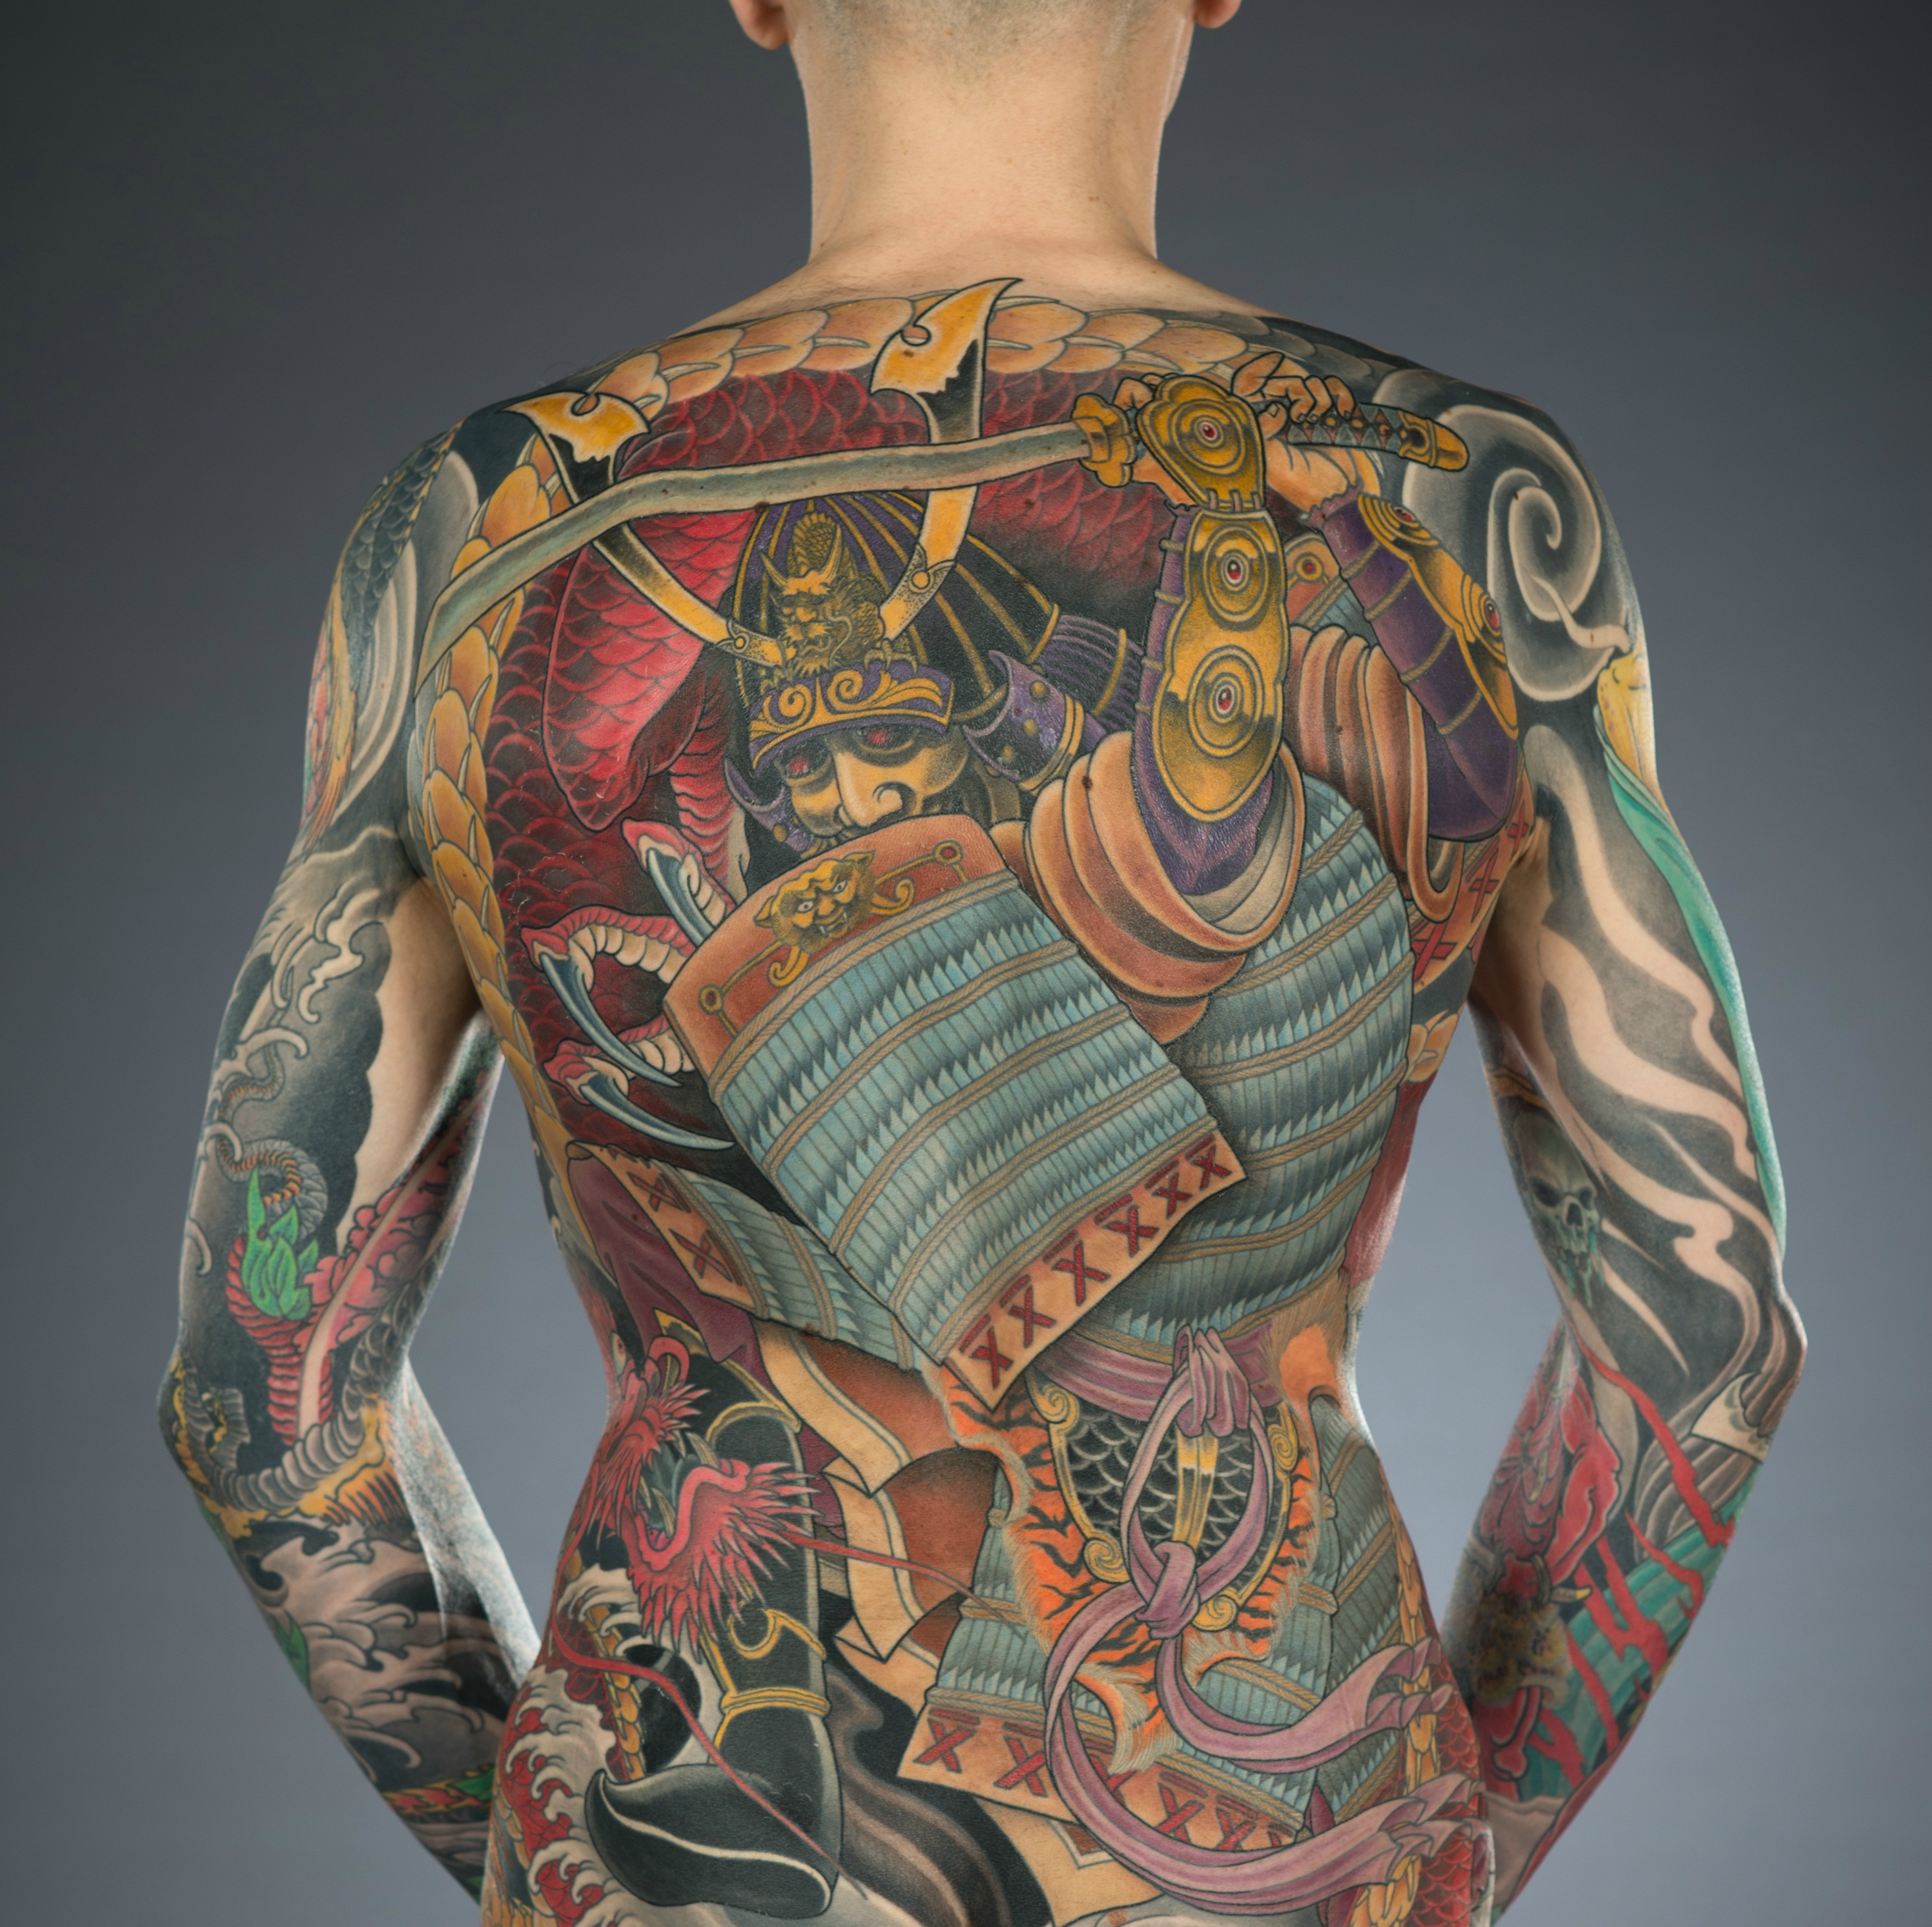 Tattoos created by Sailor Bit at the 2015 World Championships 